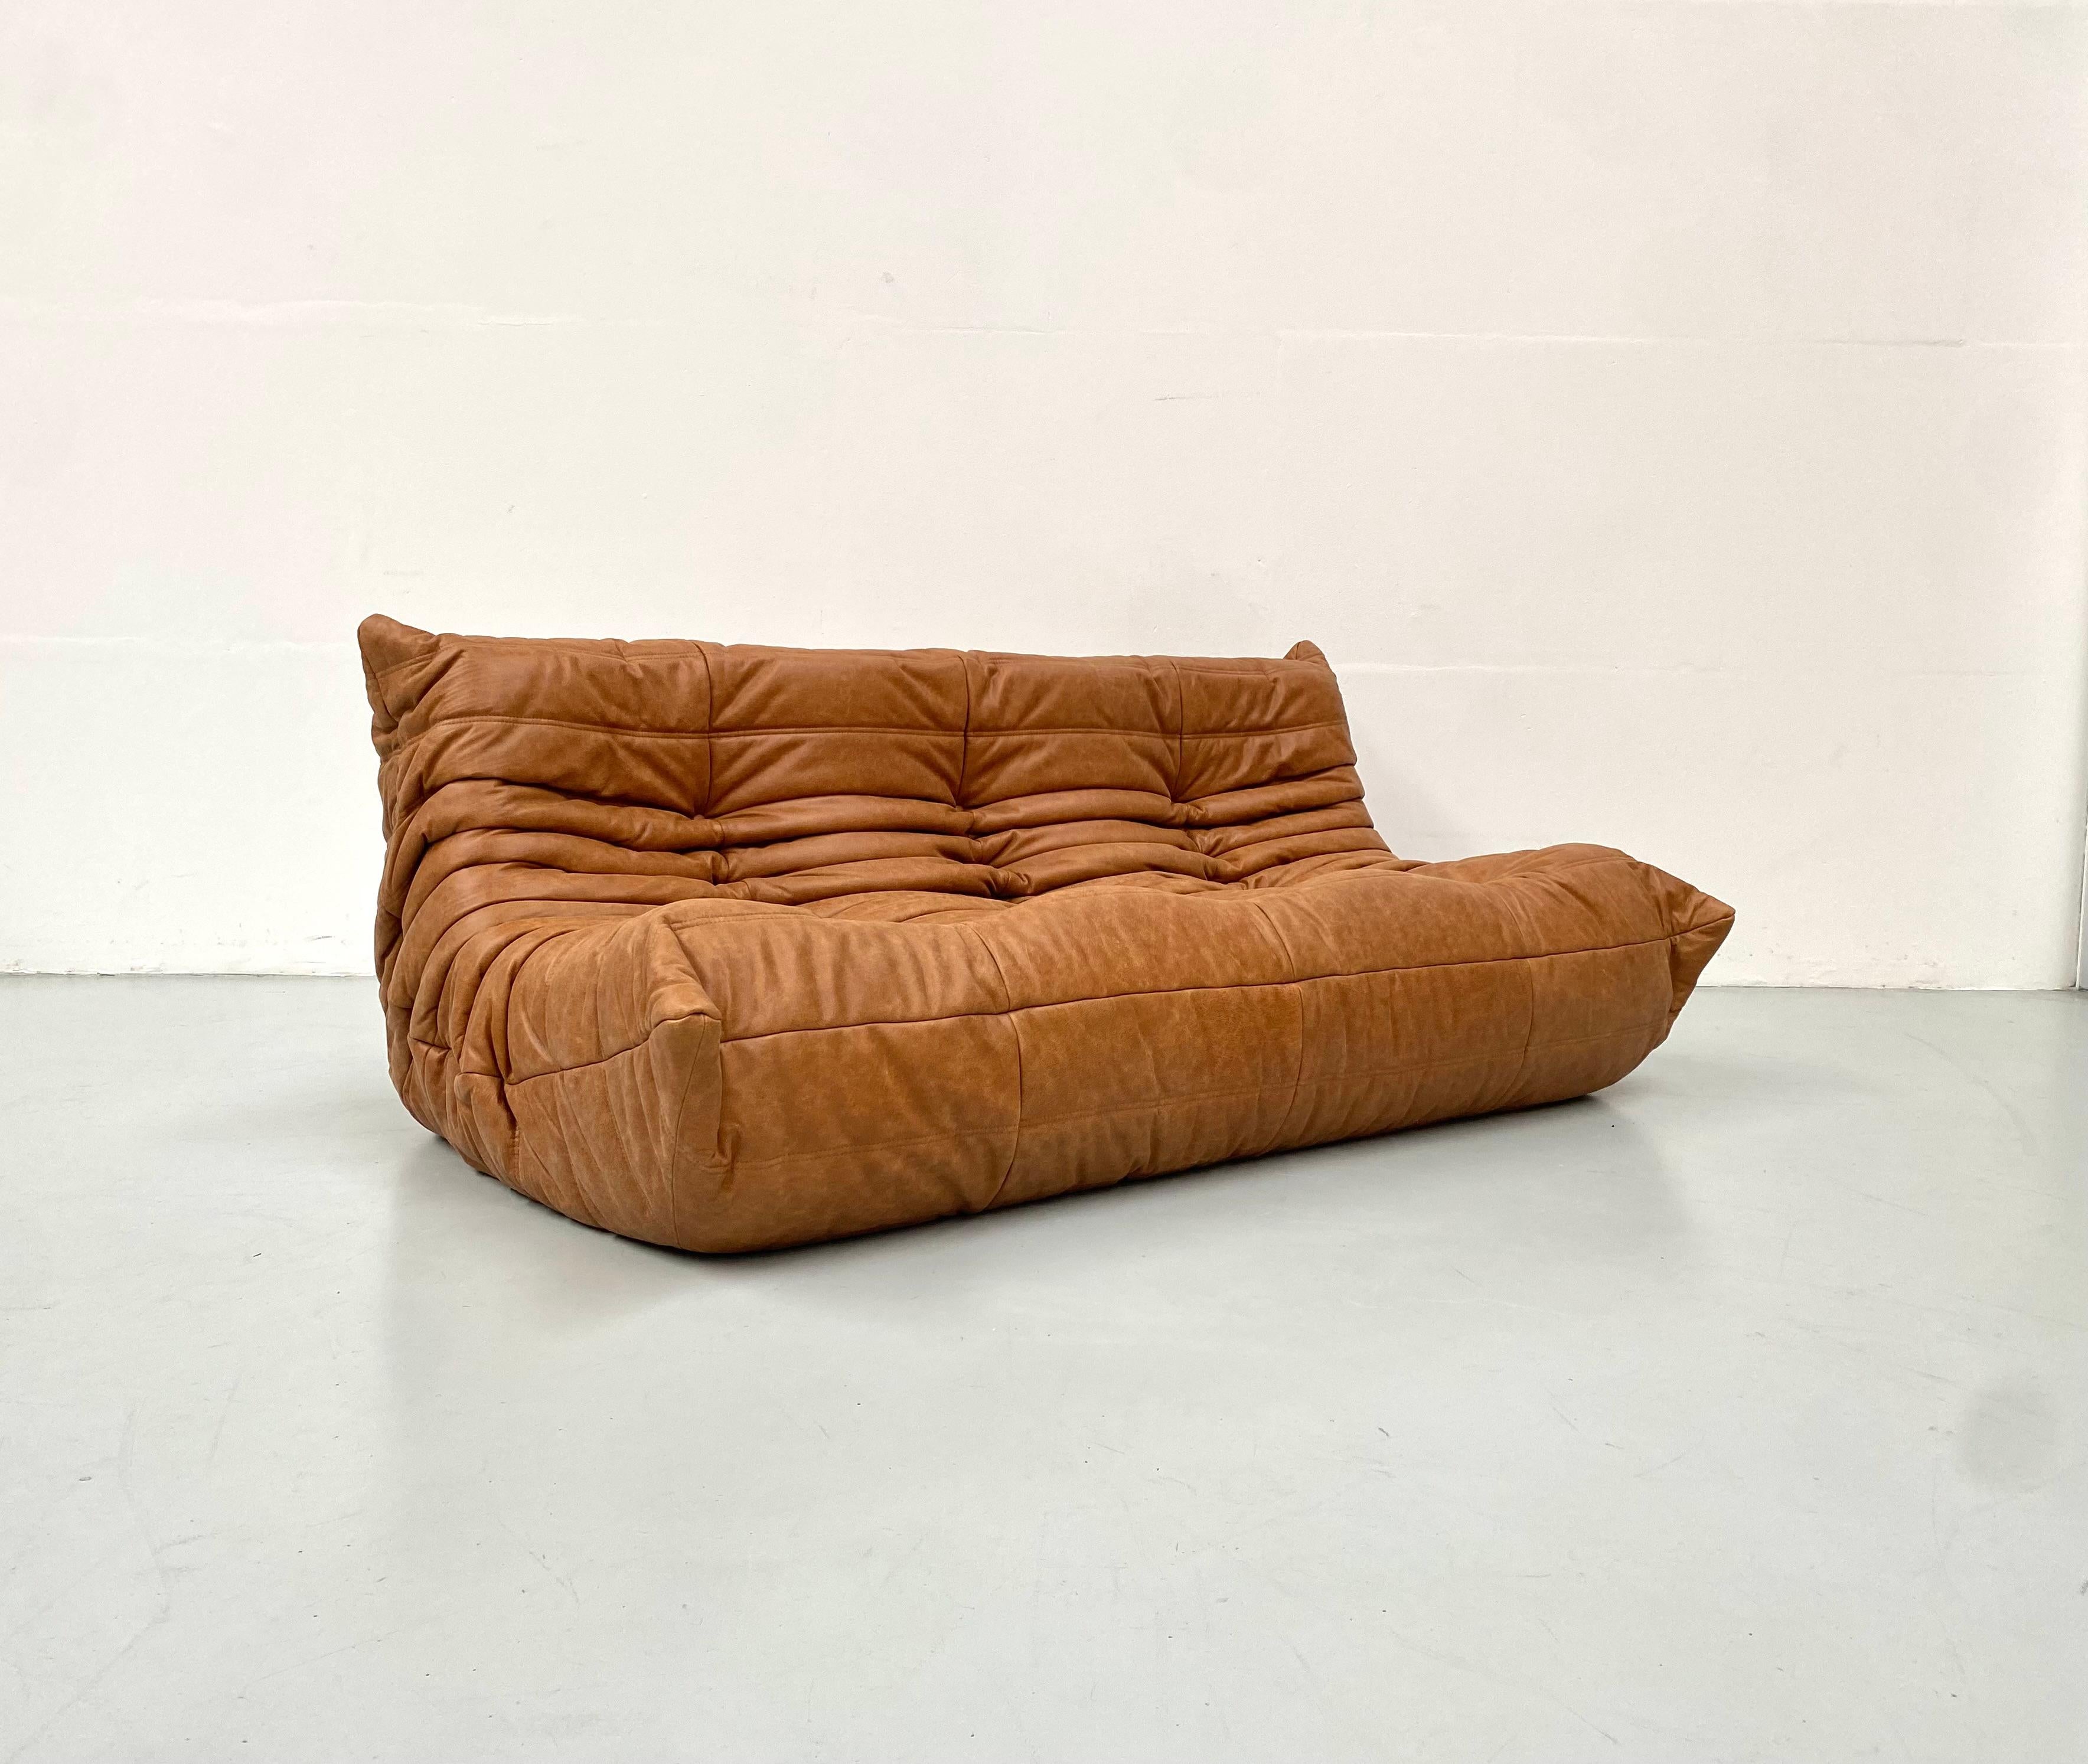 The Togo was designed by Michel Ducaroy in 1973 for Ligne Roset. It is the first sofa/chair ever made only of foam and leather. The innerwork consists of foam in 5 different densities.